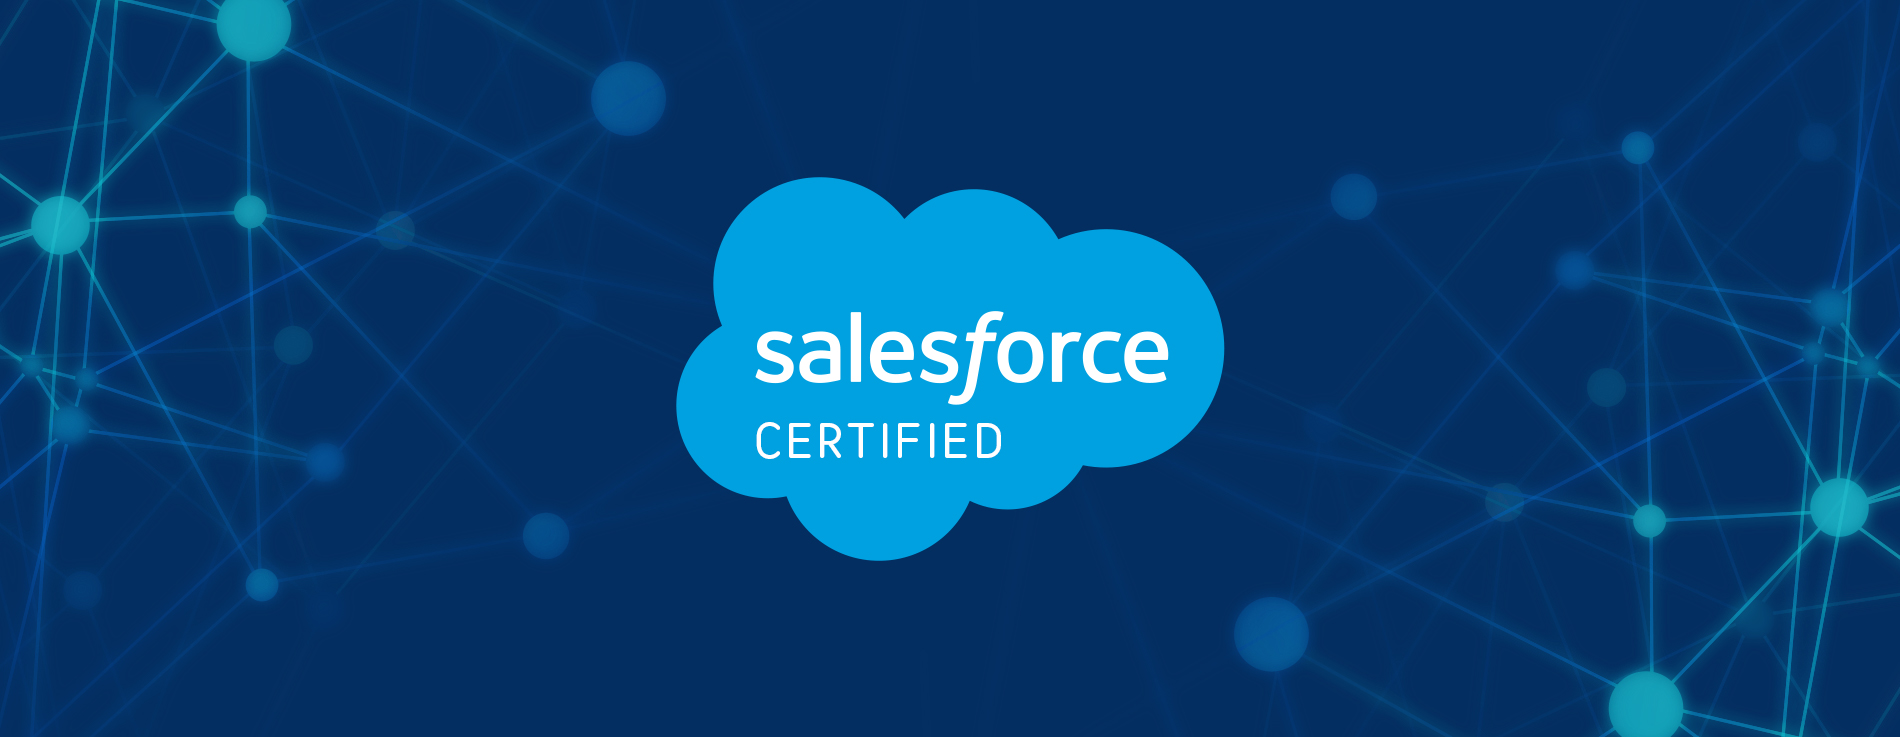 how to become a salesforce certified developer